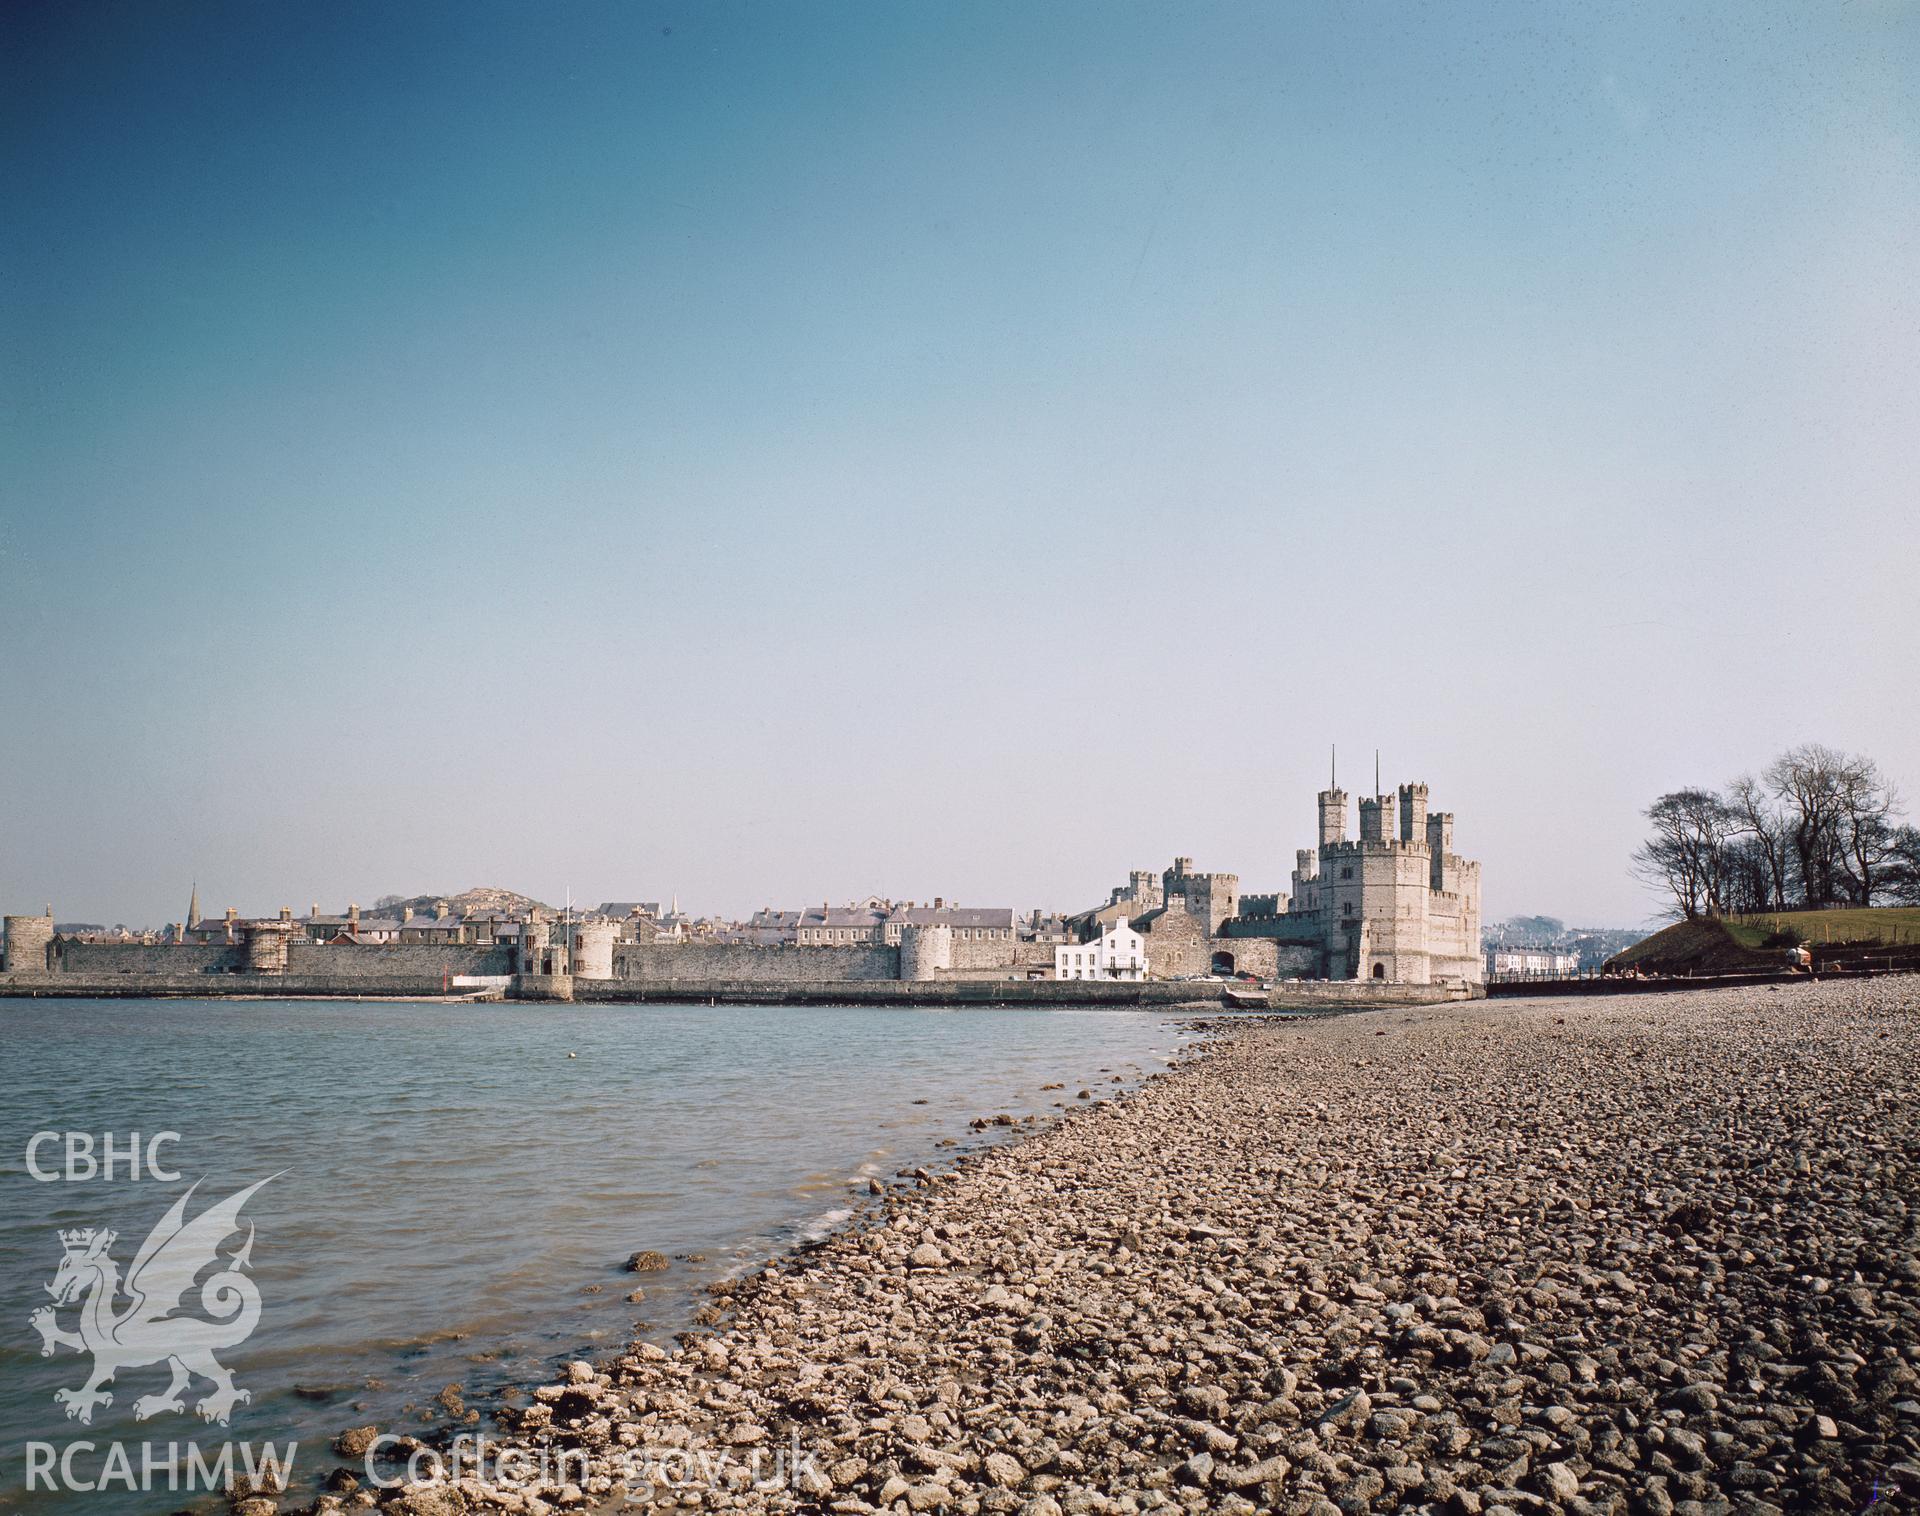 1 colour transparency showing general view of Caernarfon Castle; collated by the former Central Office of Information.